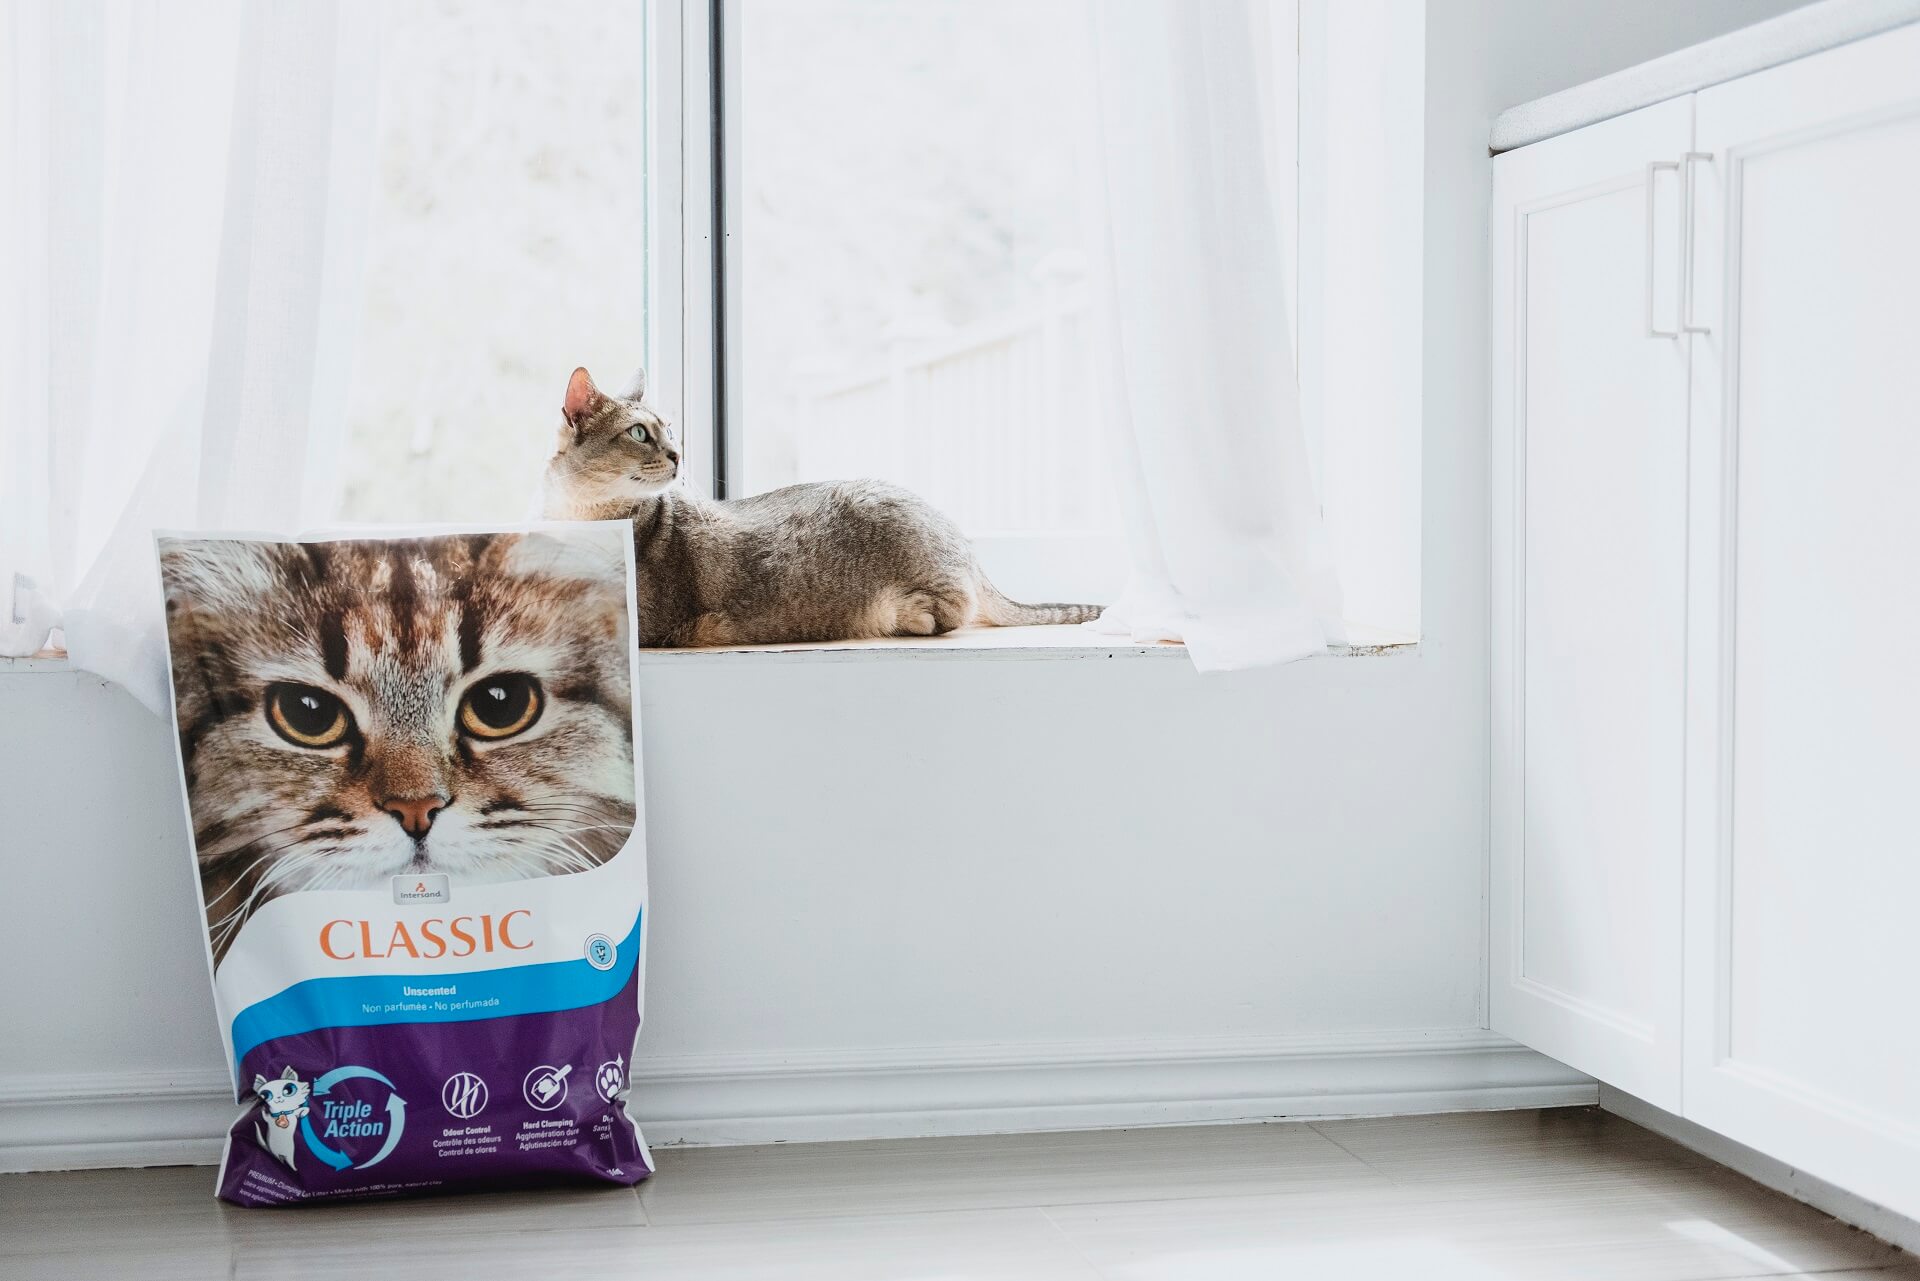 Classic – Scented clumping litter